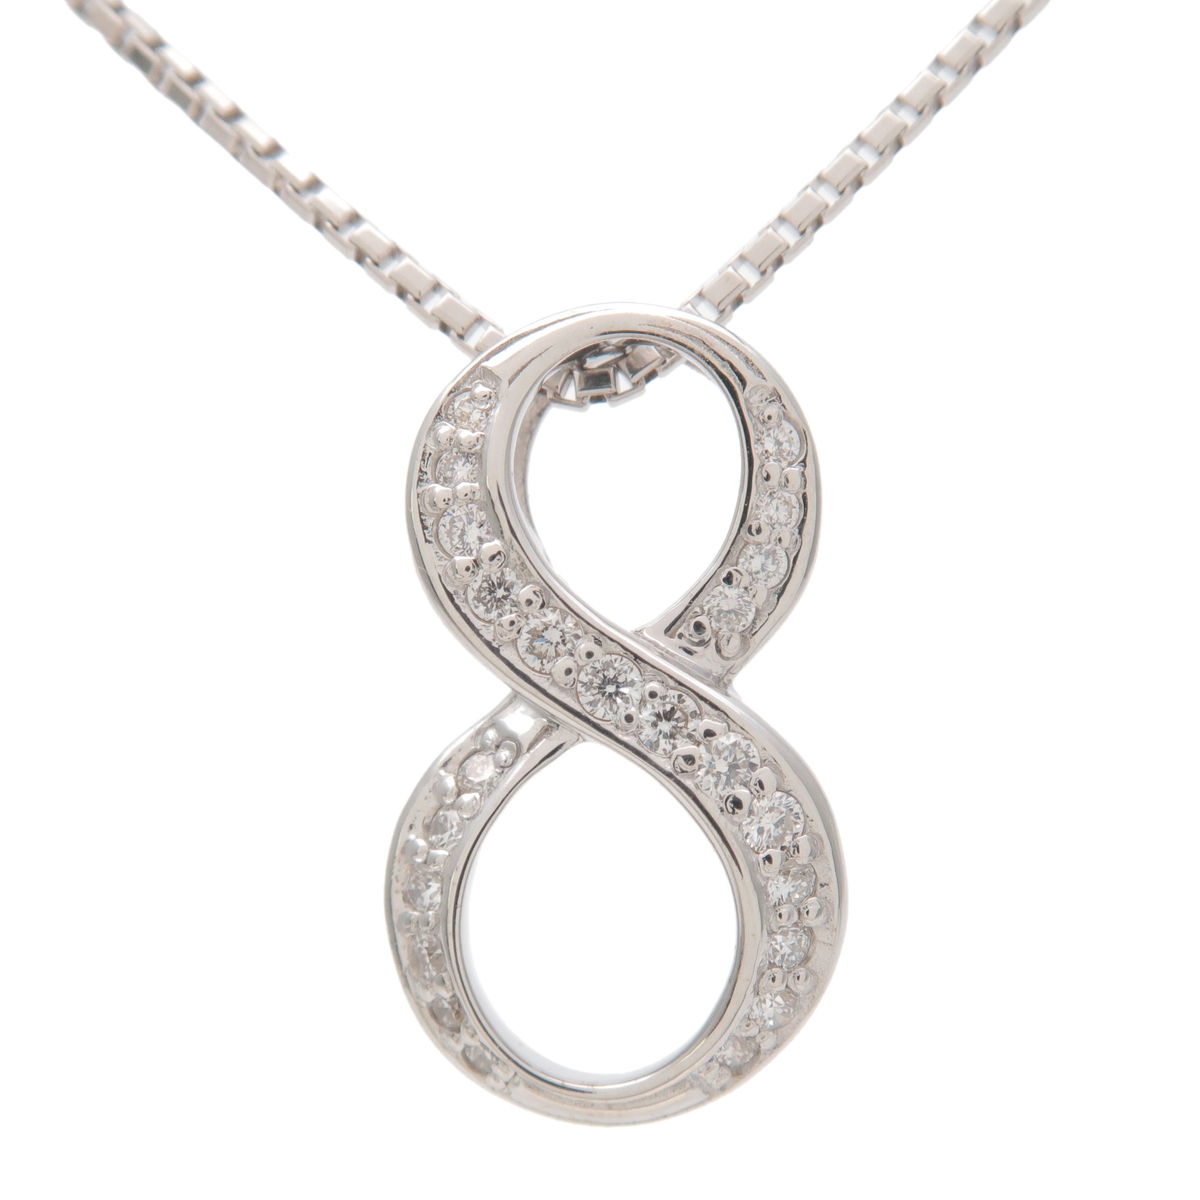 NOMBRE-Number-8-Diamond-Necklace-Small-0.19ct-K18-White-Gold